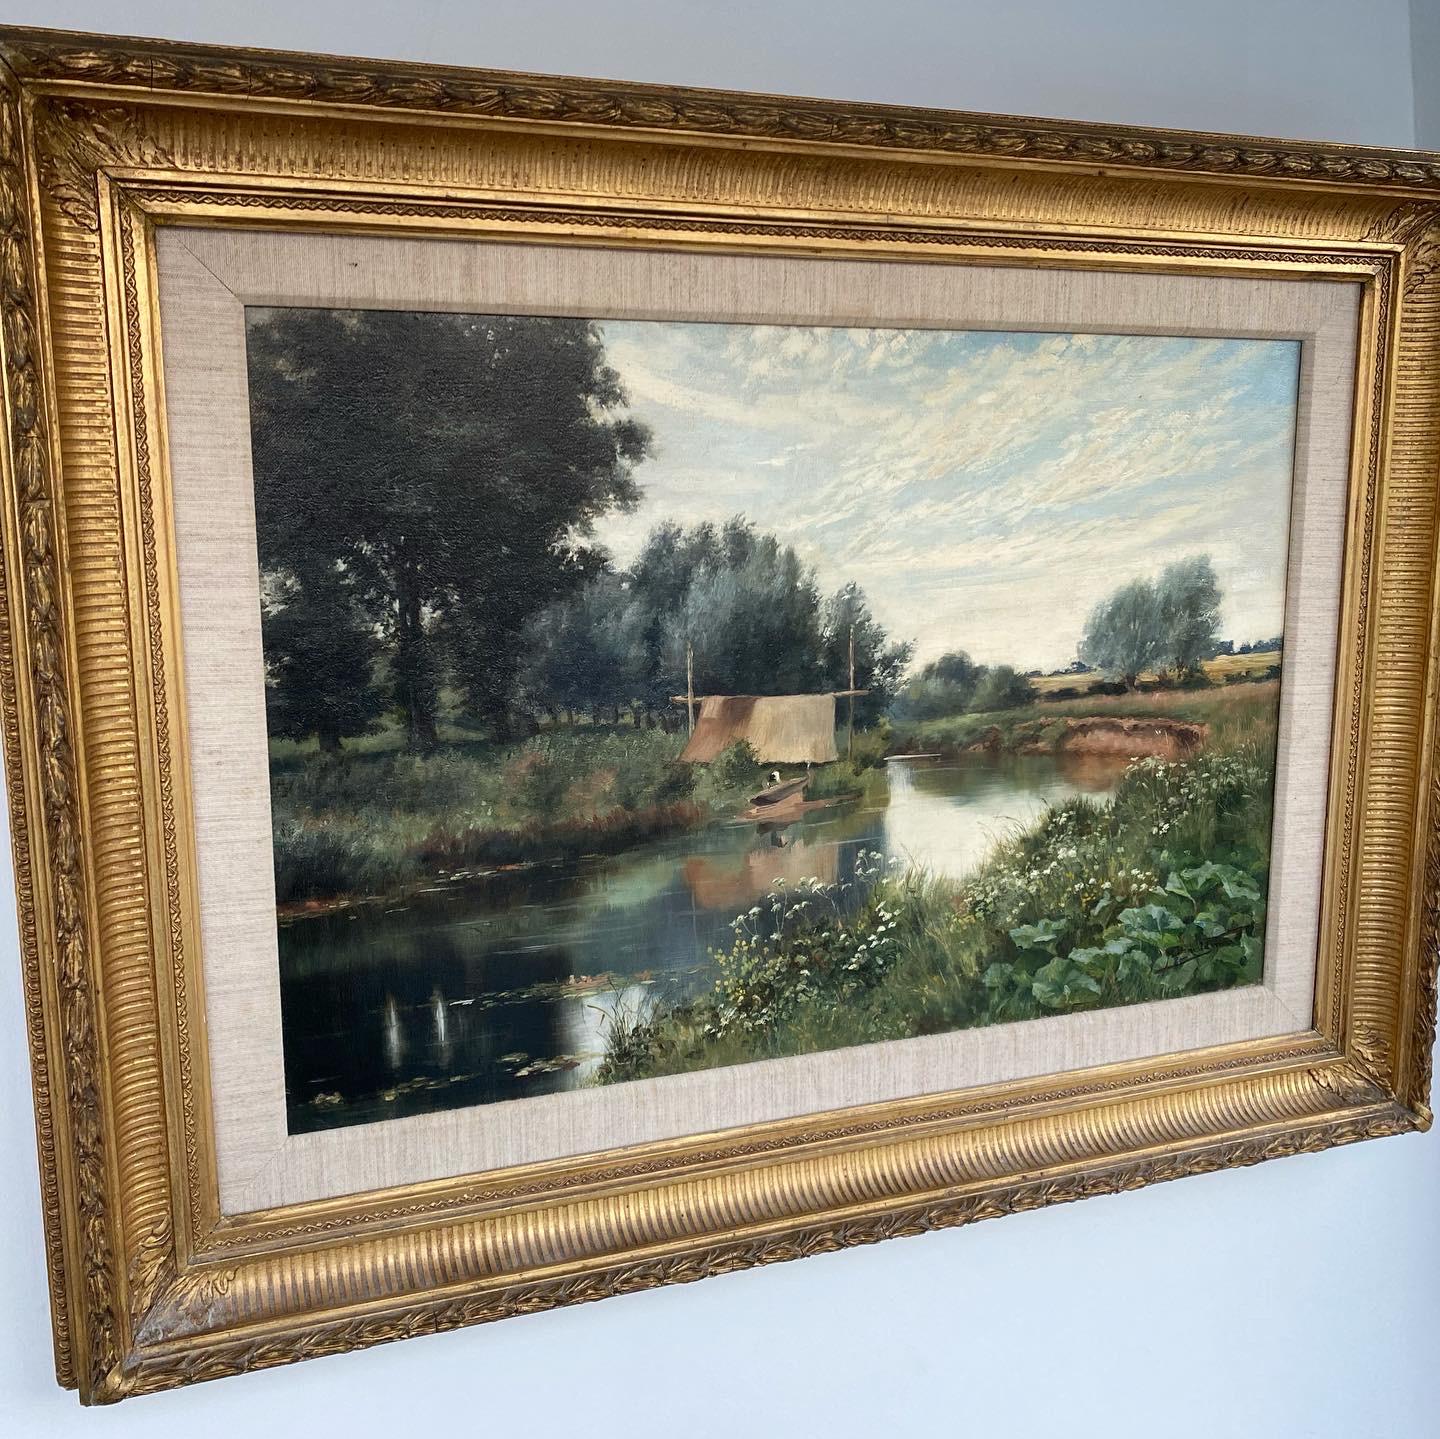 A well executed River landscape painting by Helen Donald-Smith fl, 1880-1925. Nicely framed and mounted. Helen Donald-Smith was an English artist who worked in oil and watercolor. Her work featured landscapes, particularly of Venice, and